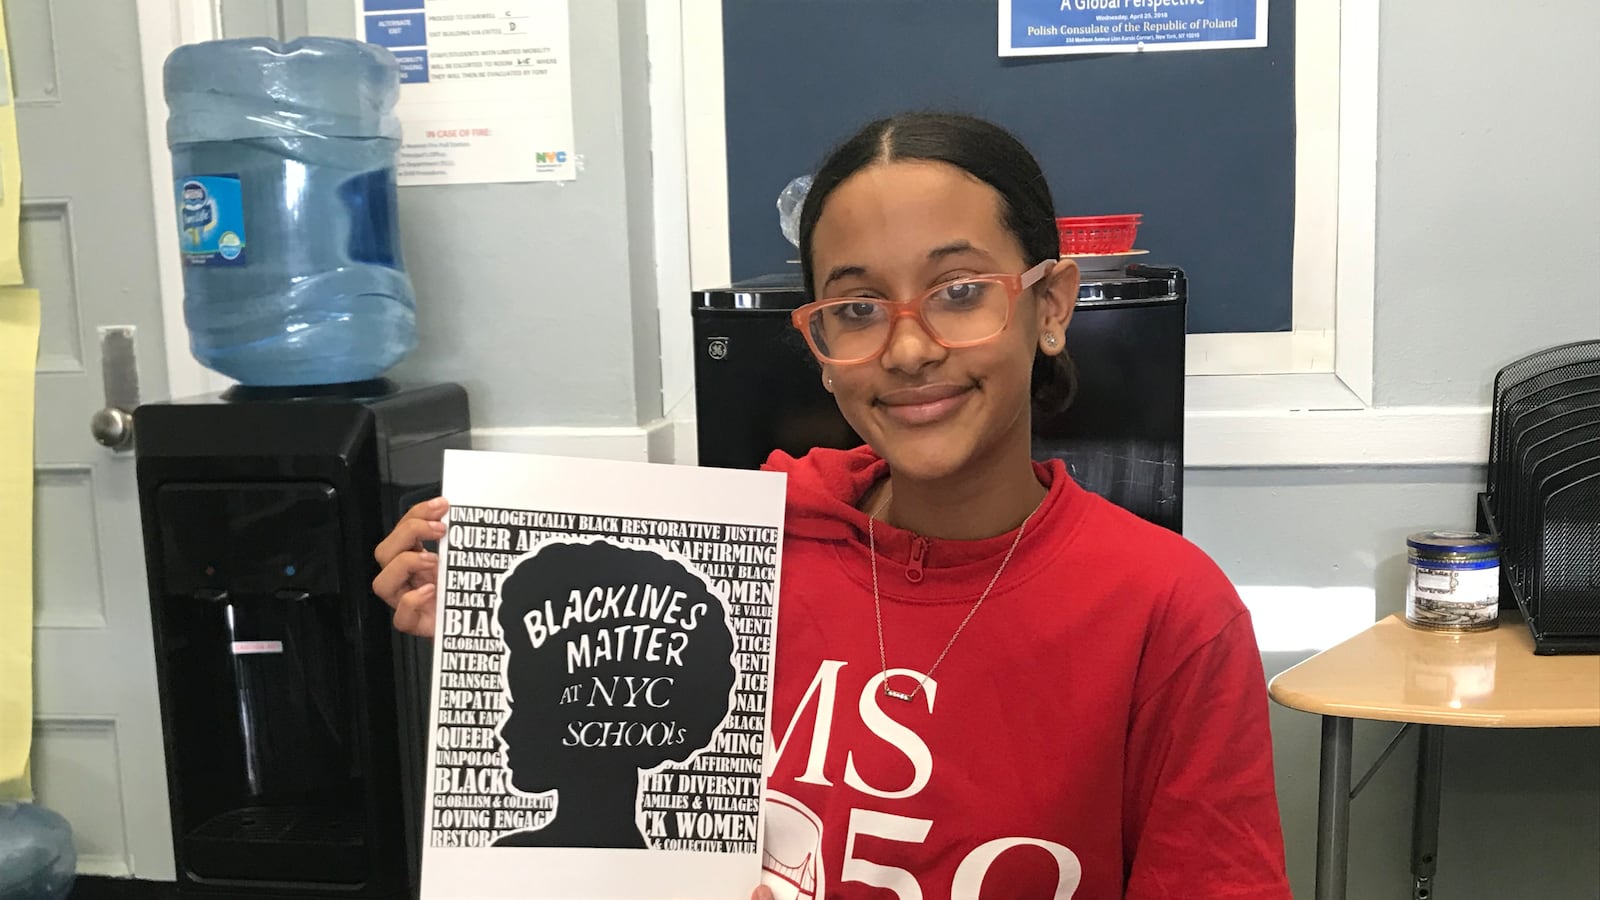 Emma Pichardo, a student at Brooklyn middle school, holds up her winning design for a Black Lives Matter t-shirt contest.